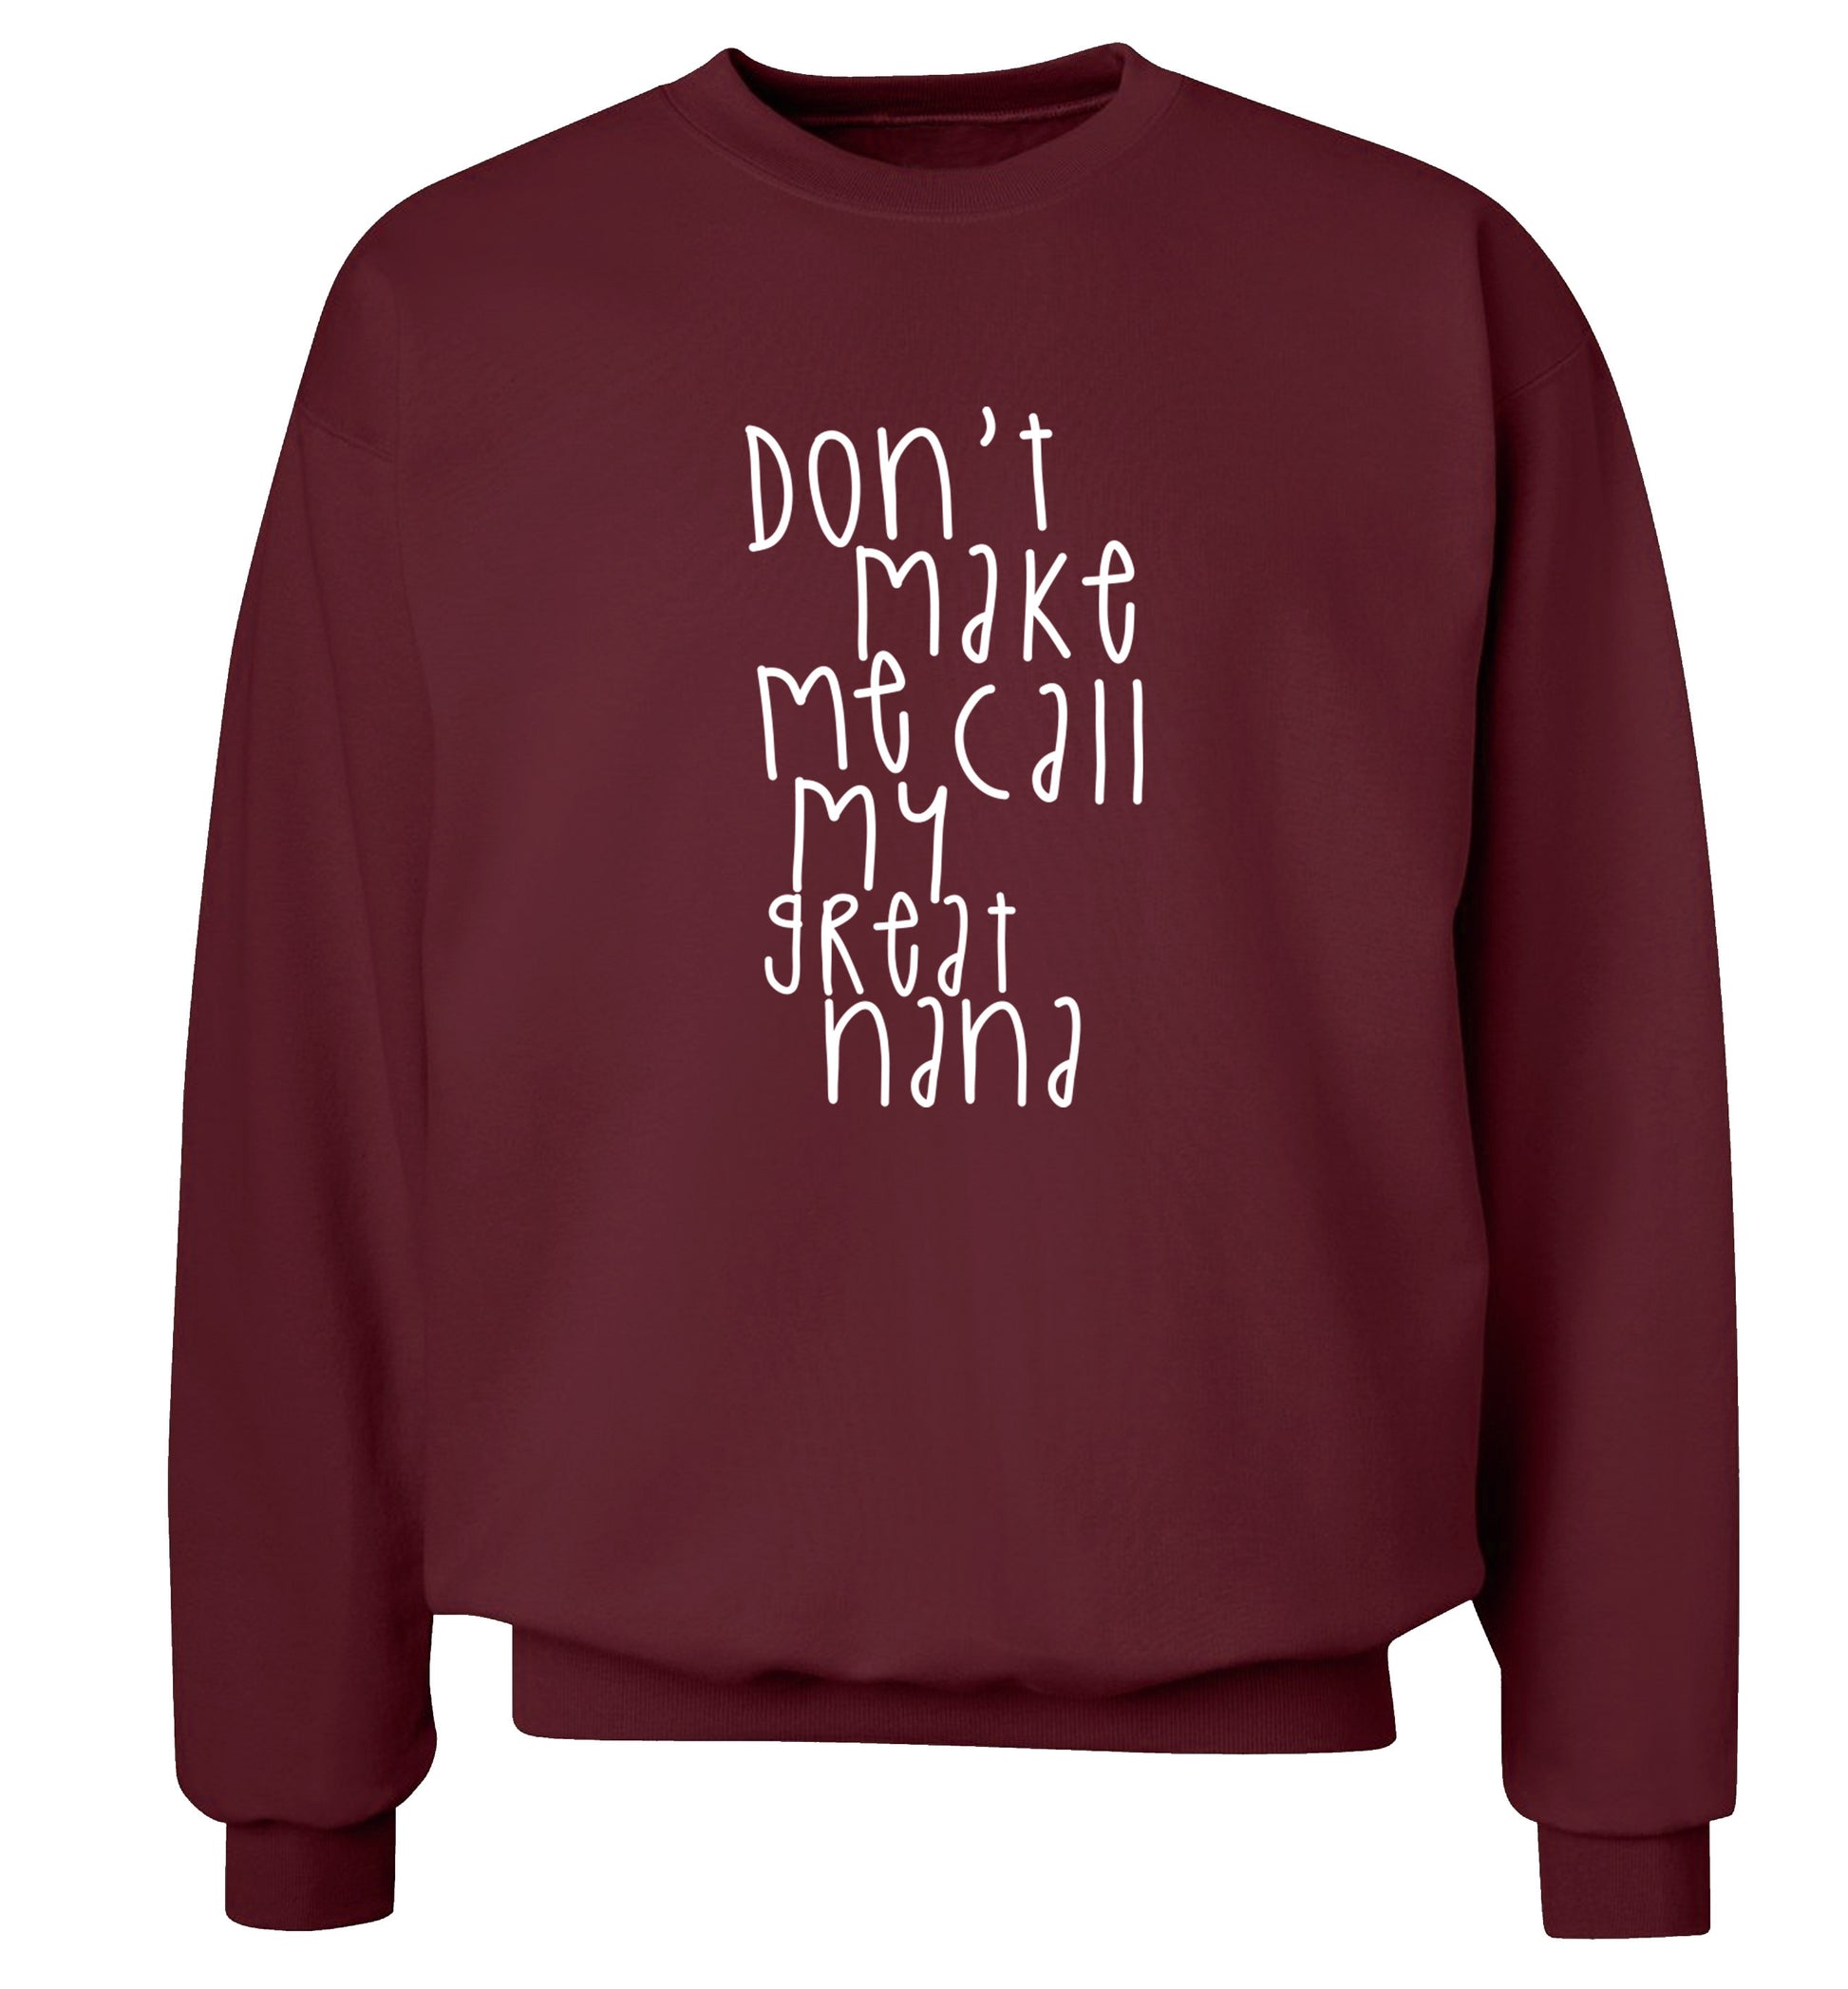 Don't make me call my great nana Adult's unisex maroon Sweater 2XL